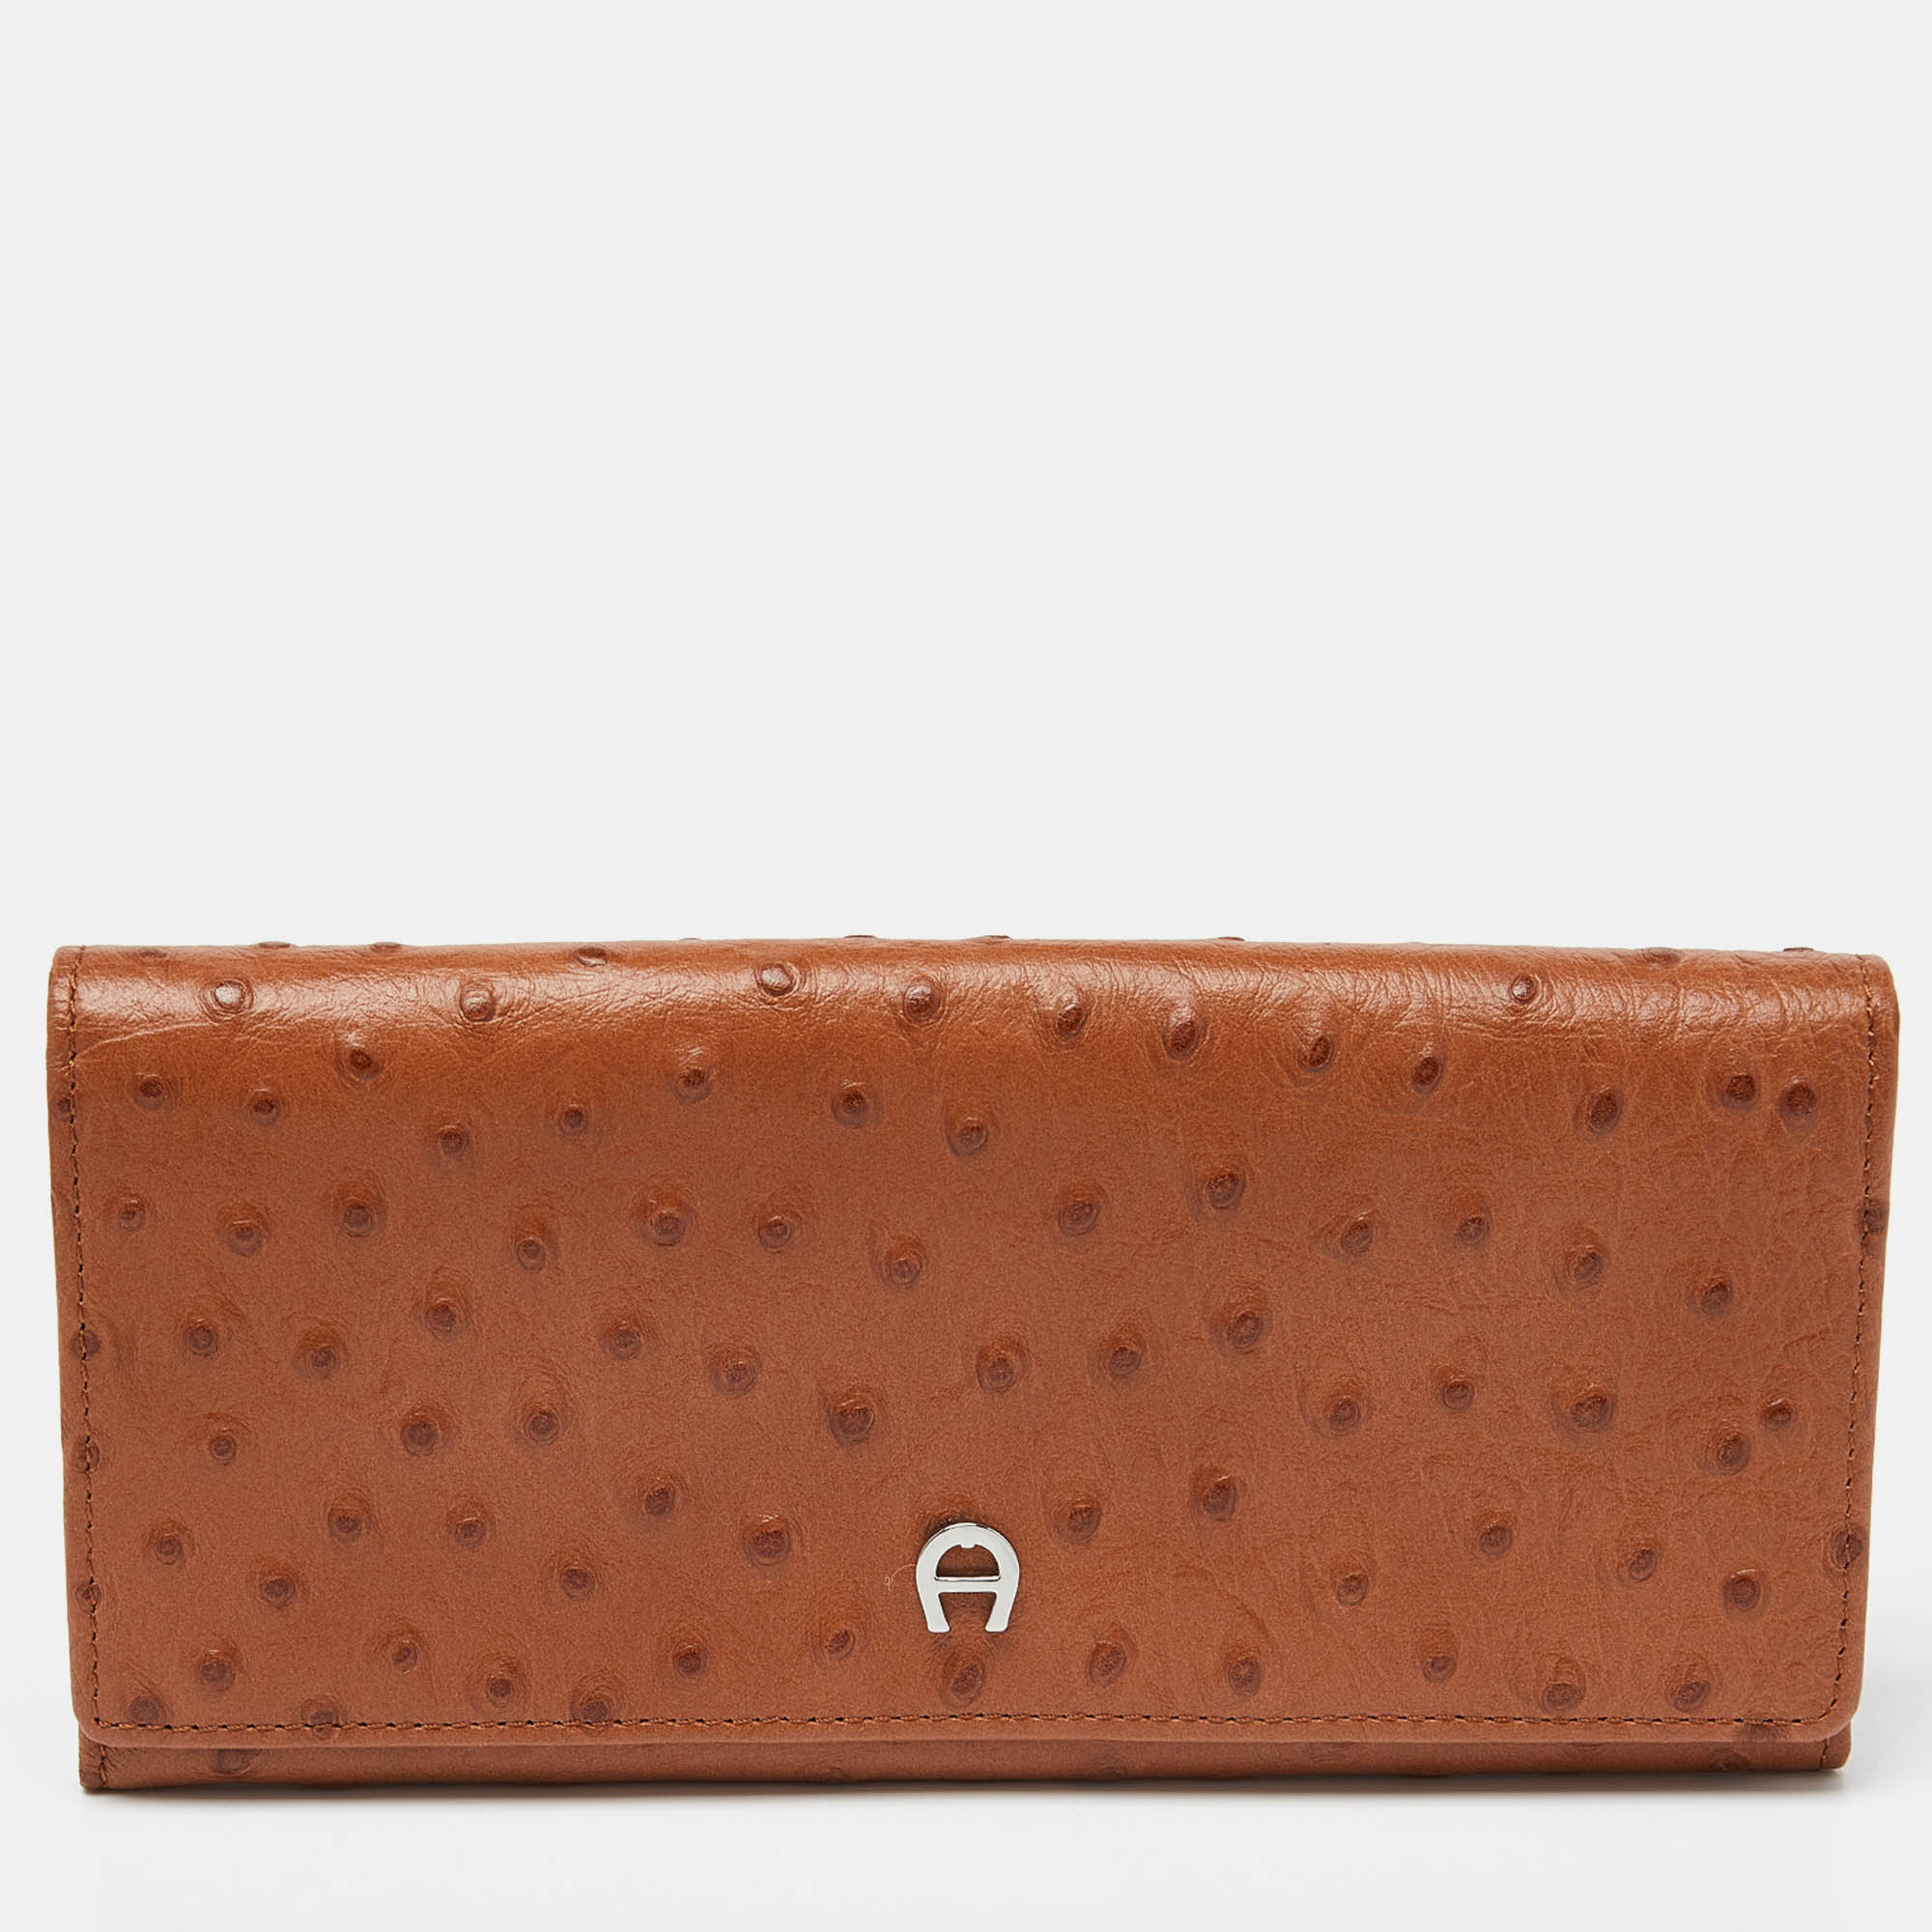 

Aigner Tan Ostrich Embossed Leather Flap Continental Wallet